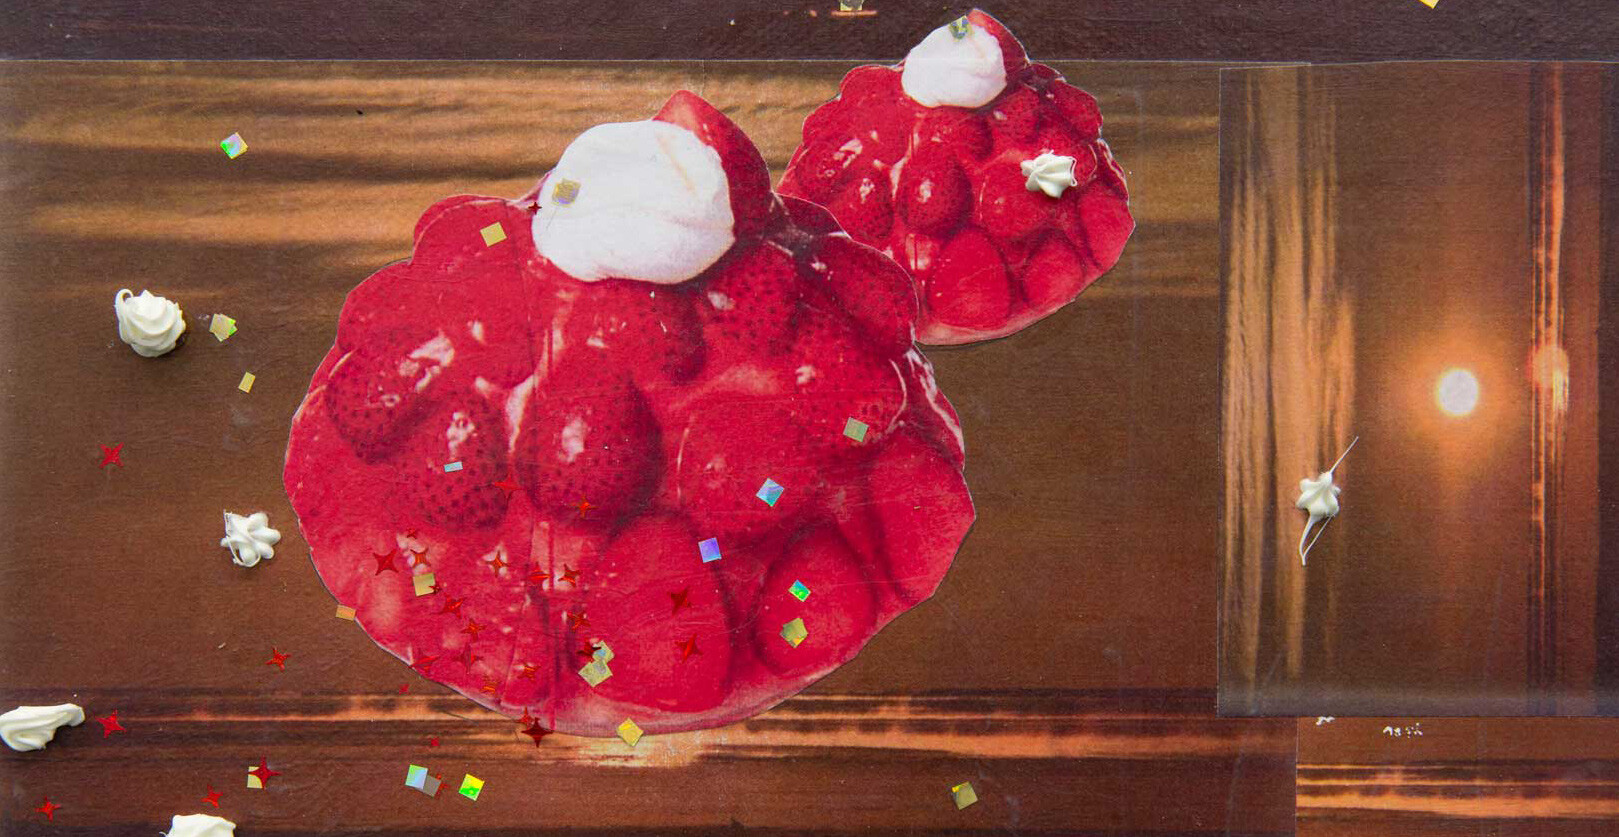 A detail from a work by Maggie Lee, titled Fraise Cake, dated 2019.